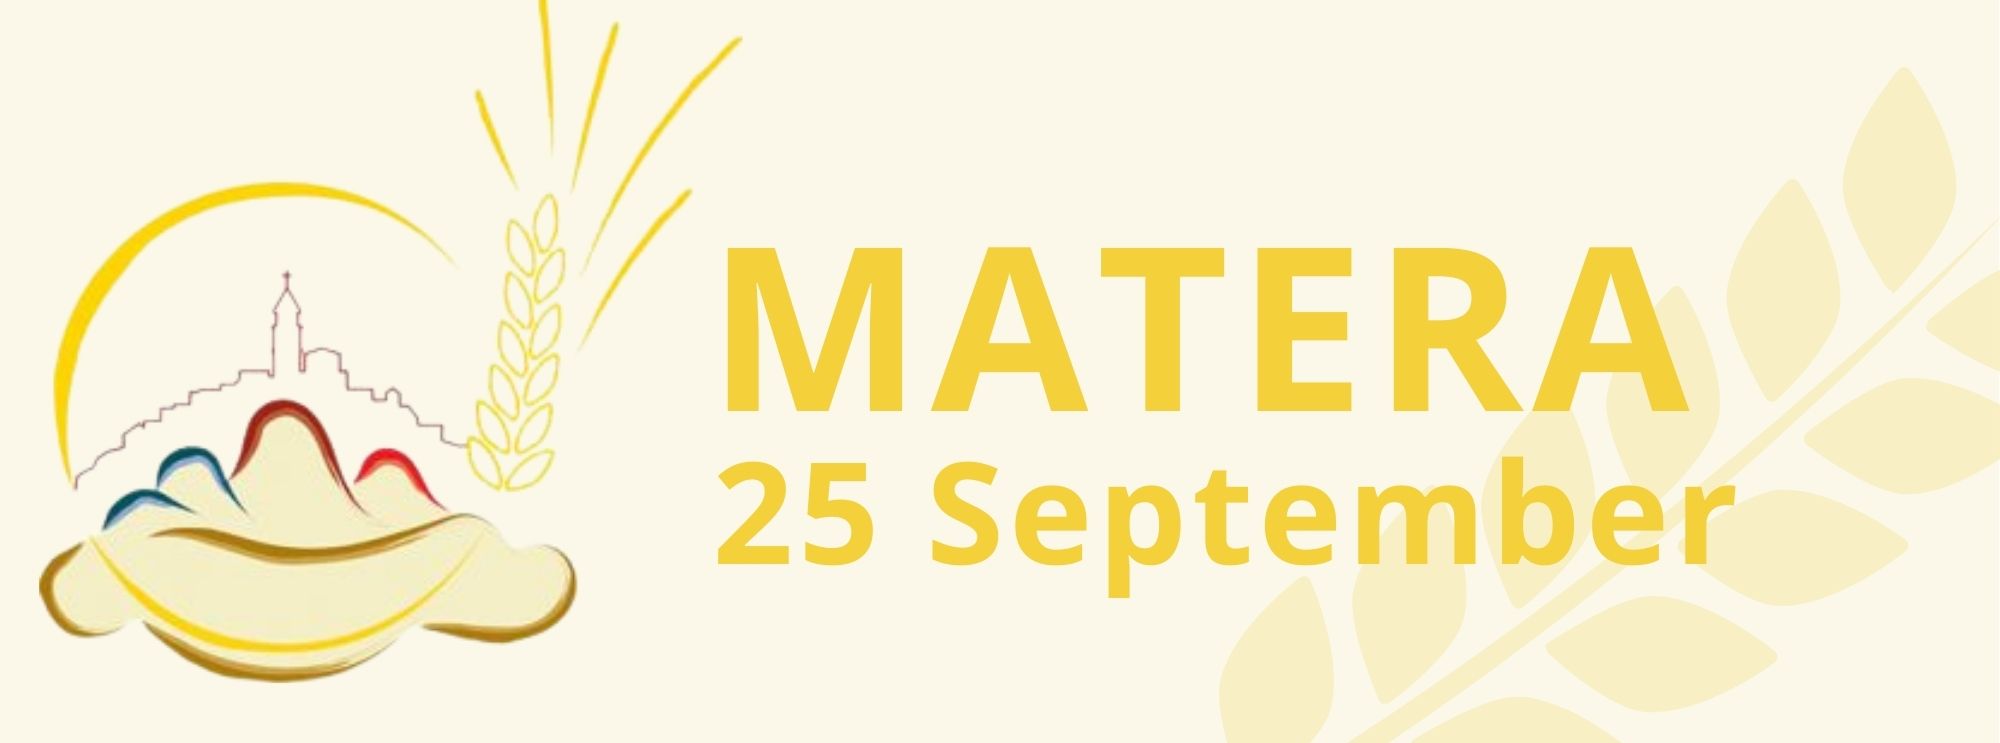 Pastoral Visit of the Holy Father to Matera for the conclusion of the 27th National Eucharistic Congress (25 September 2022)